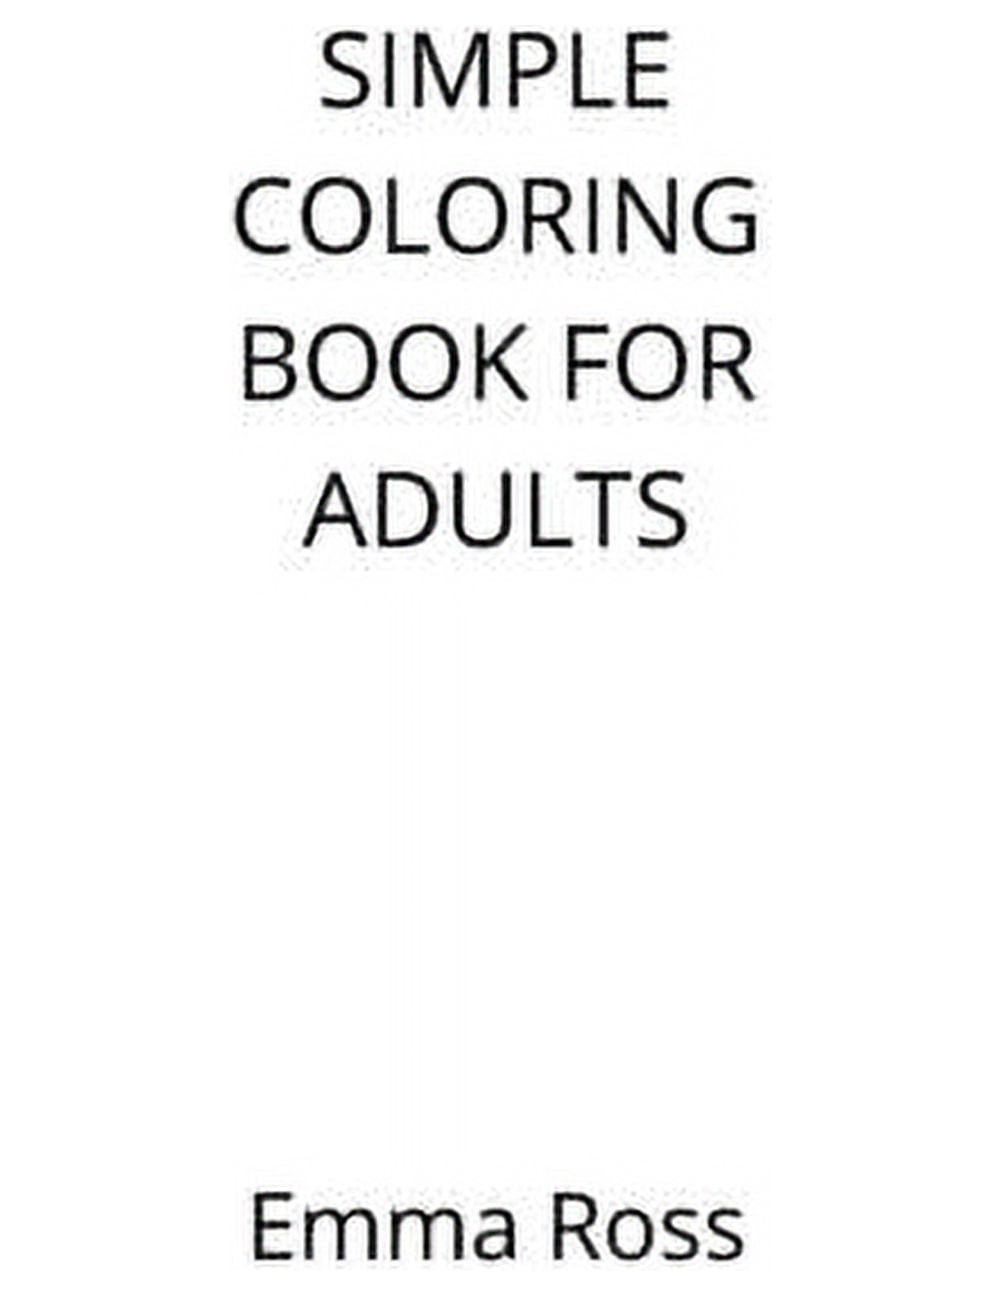 SIMPLE COLORING BOOK FOR ADULTS: Gift for Senior Citizens With Larger  Designs That Are Easier to See and Easier to Color by Emma Ross